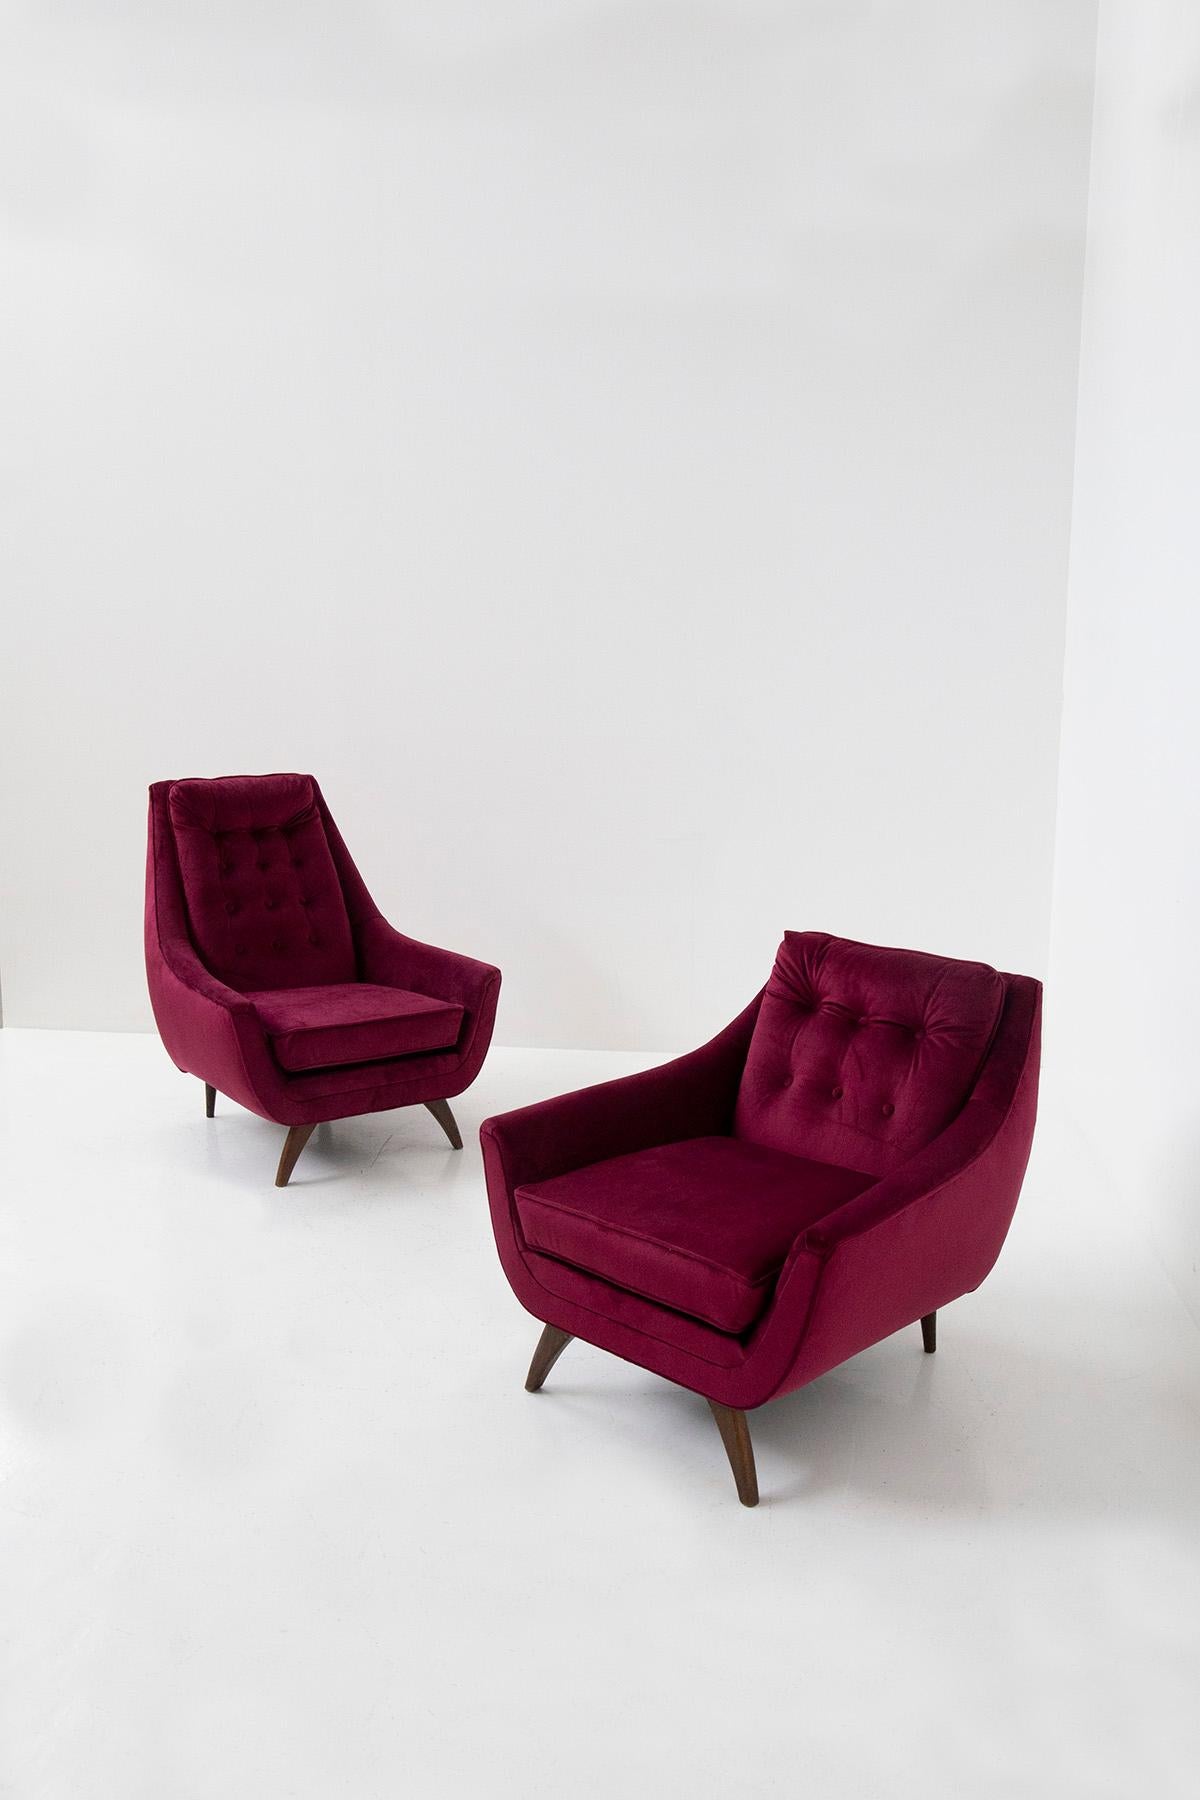 Elegant pair of armchairs by Adrian Pearsall from the 1950s. The pair is part of a duet called: Him and Her, in fact the different sizes of the pair are denoted. The taller armchair in the 1950s was intended for the man, while the lower one for the